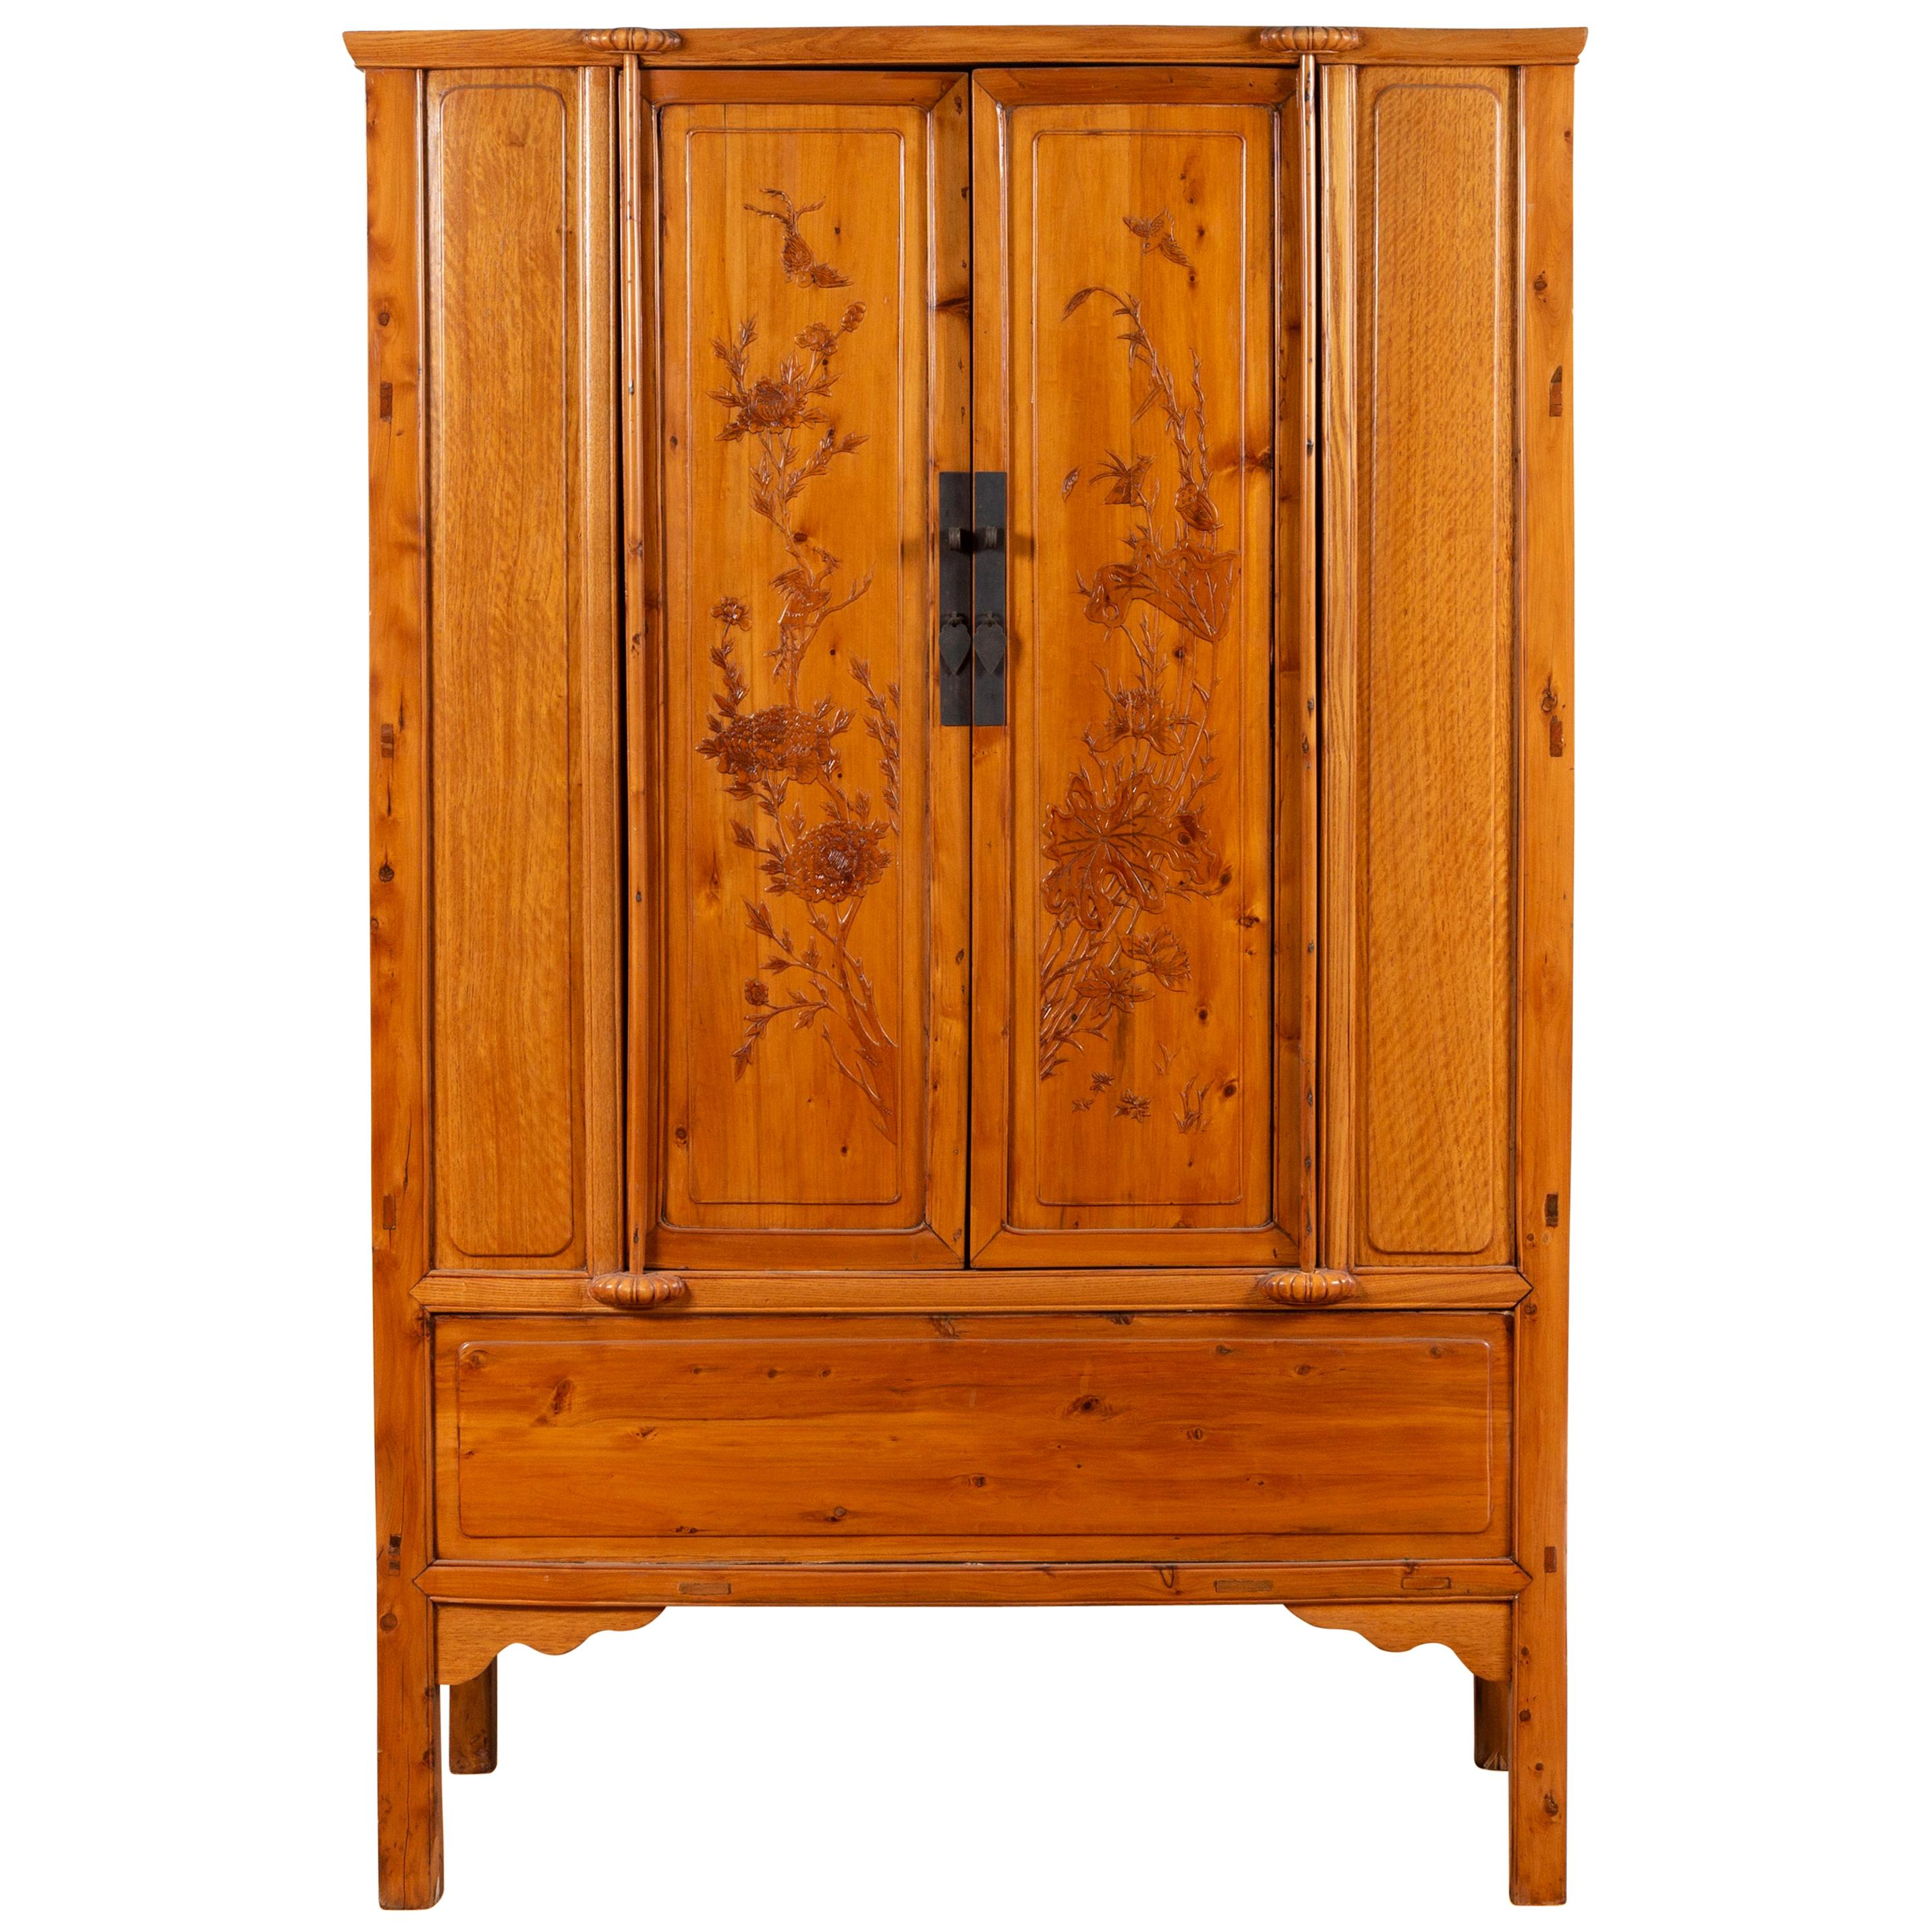 Vintage Natural Wood Two-Door Cabinet with Floral Décor and Drawers